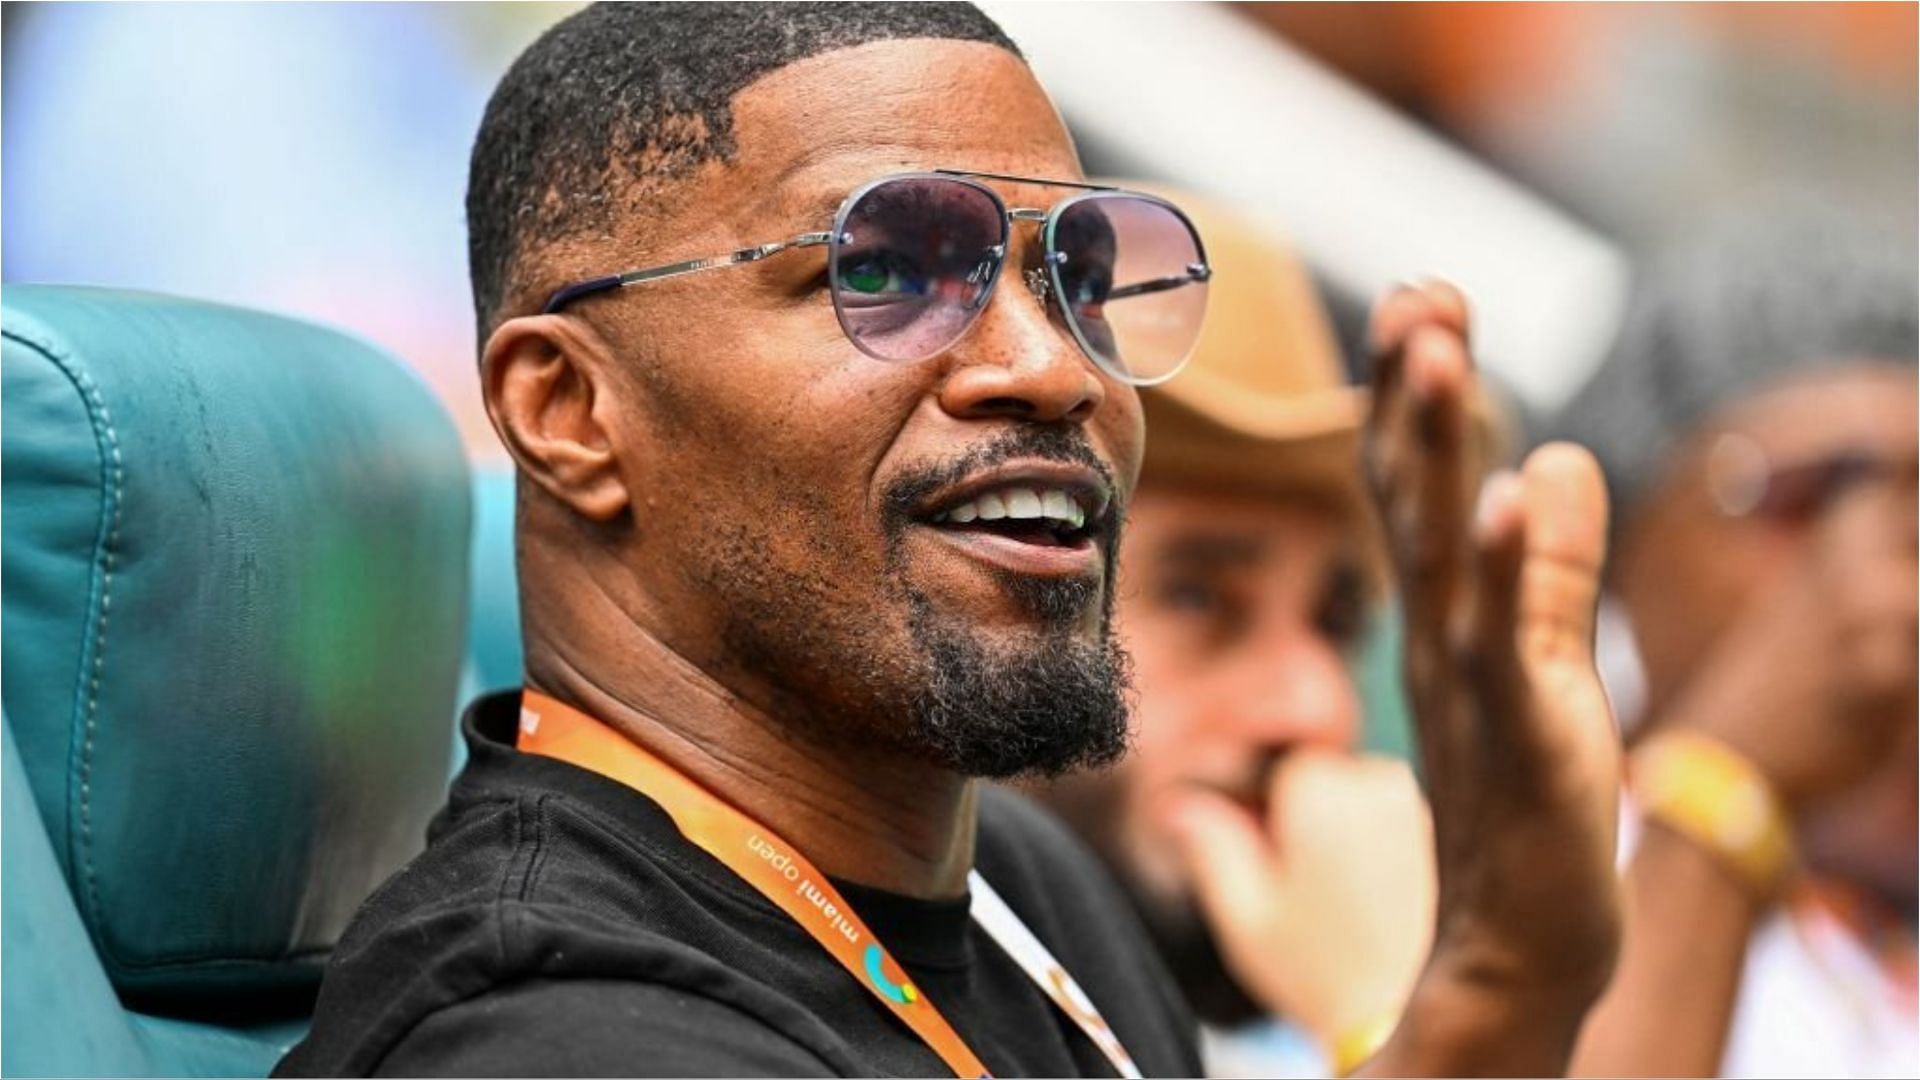 Jamie Foxx has been recovering after being taken to the hospital last week (Image via Chandan Khanna/Getty Images)